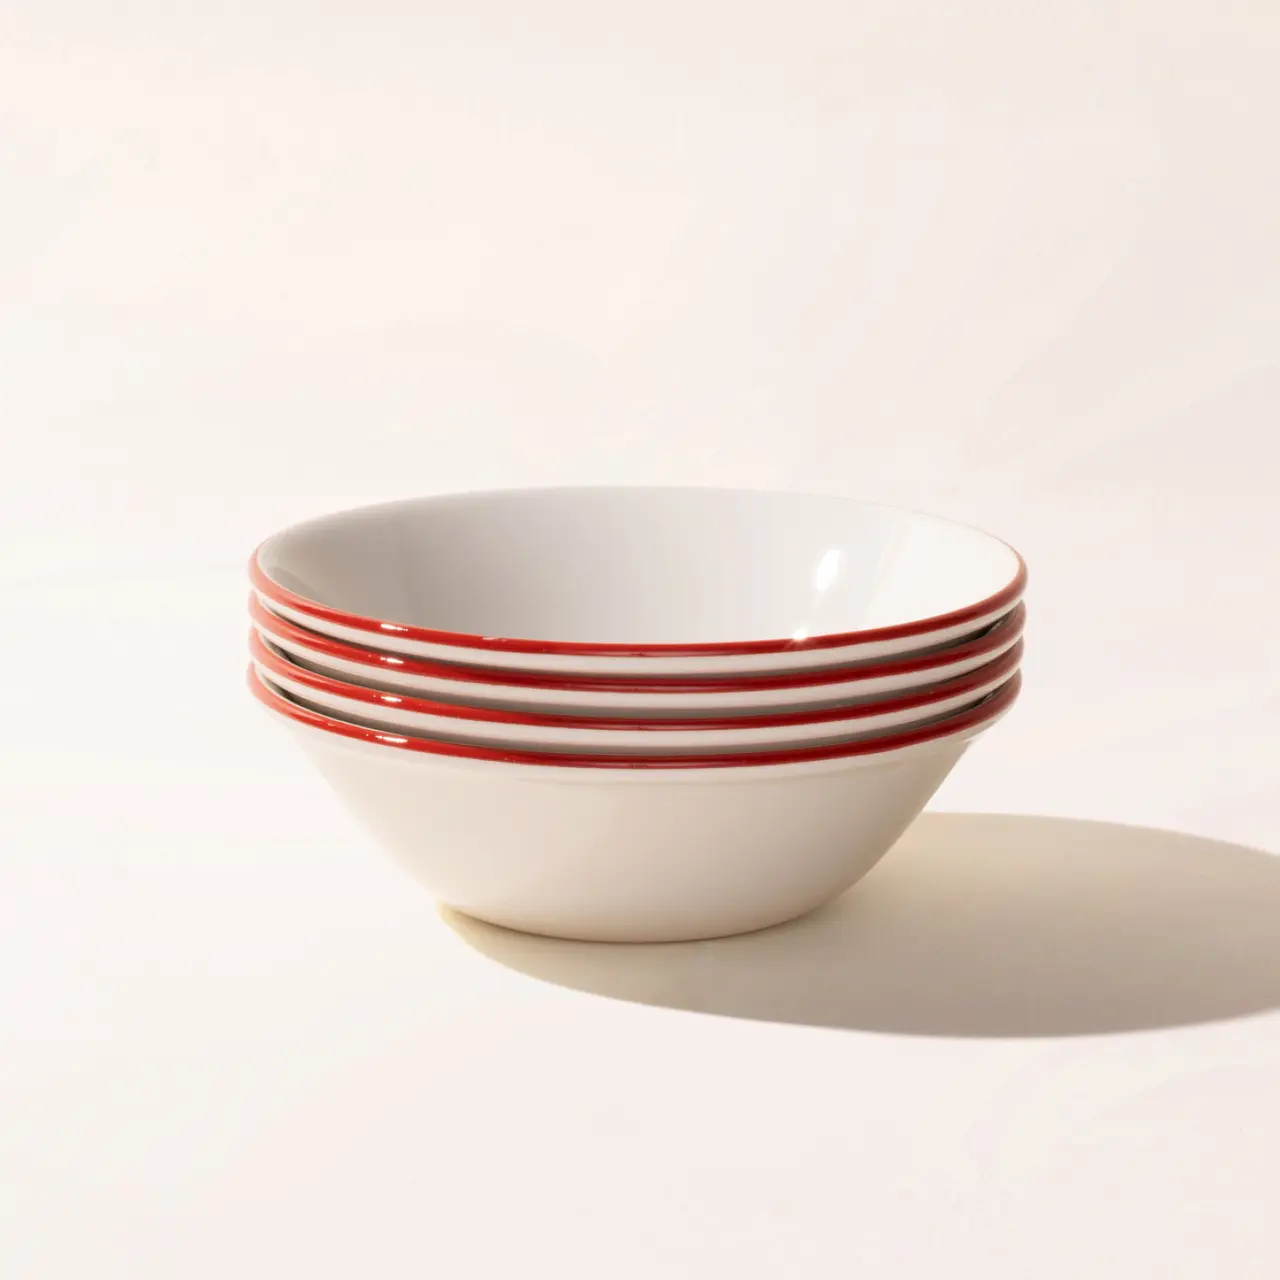 A stack of white bowls with red stripes sits on a light surface against a neutral background.